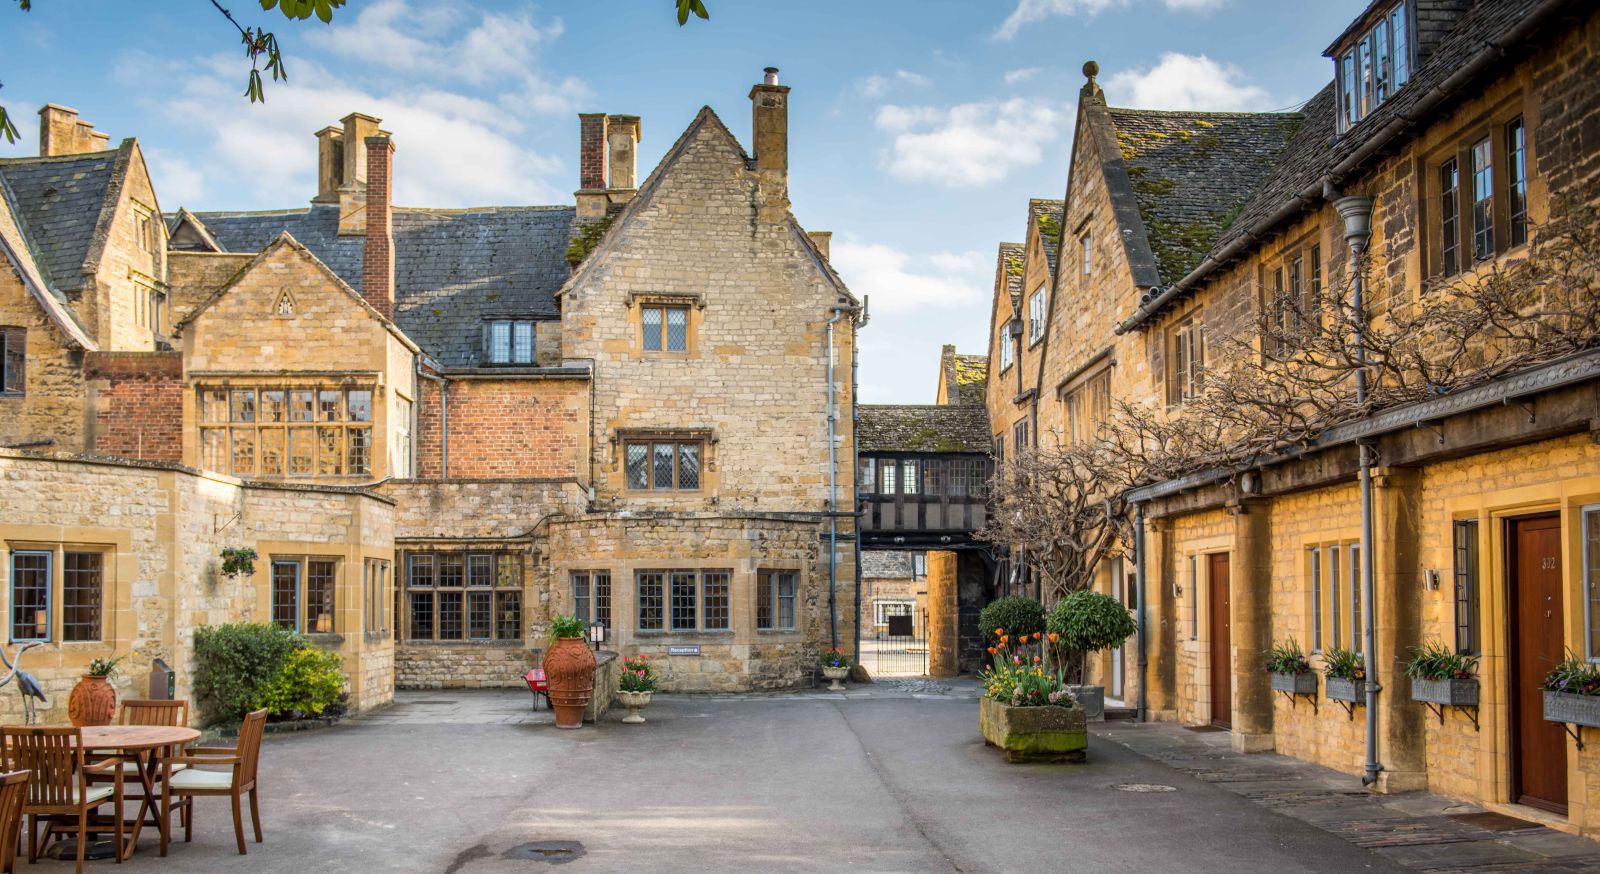 Courtyard of The Lygon Arms in the Cotswolds, England